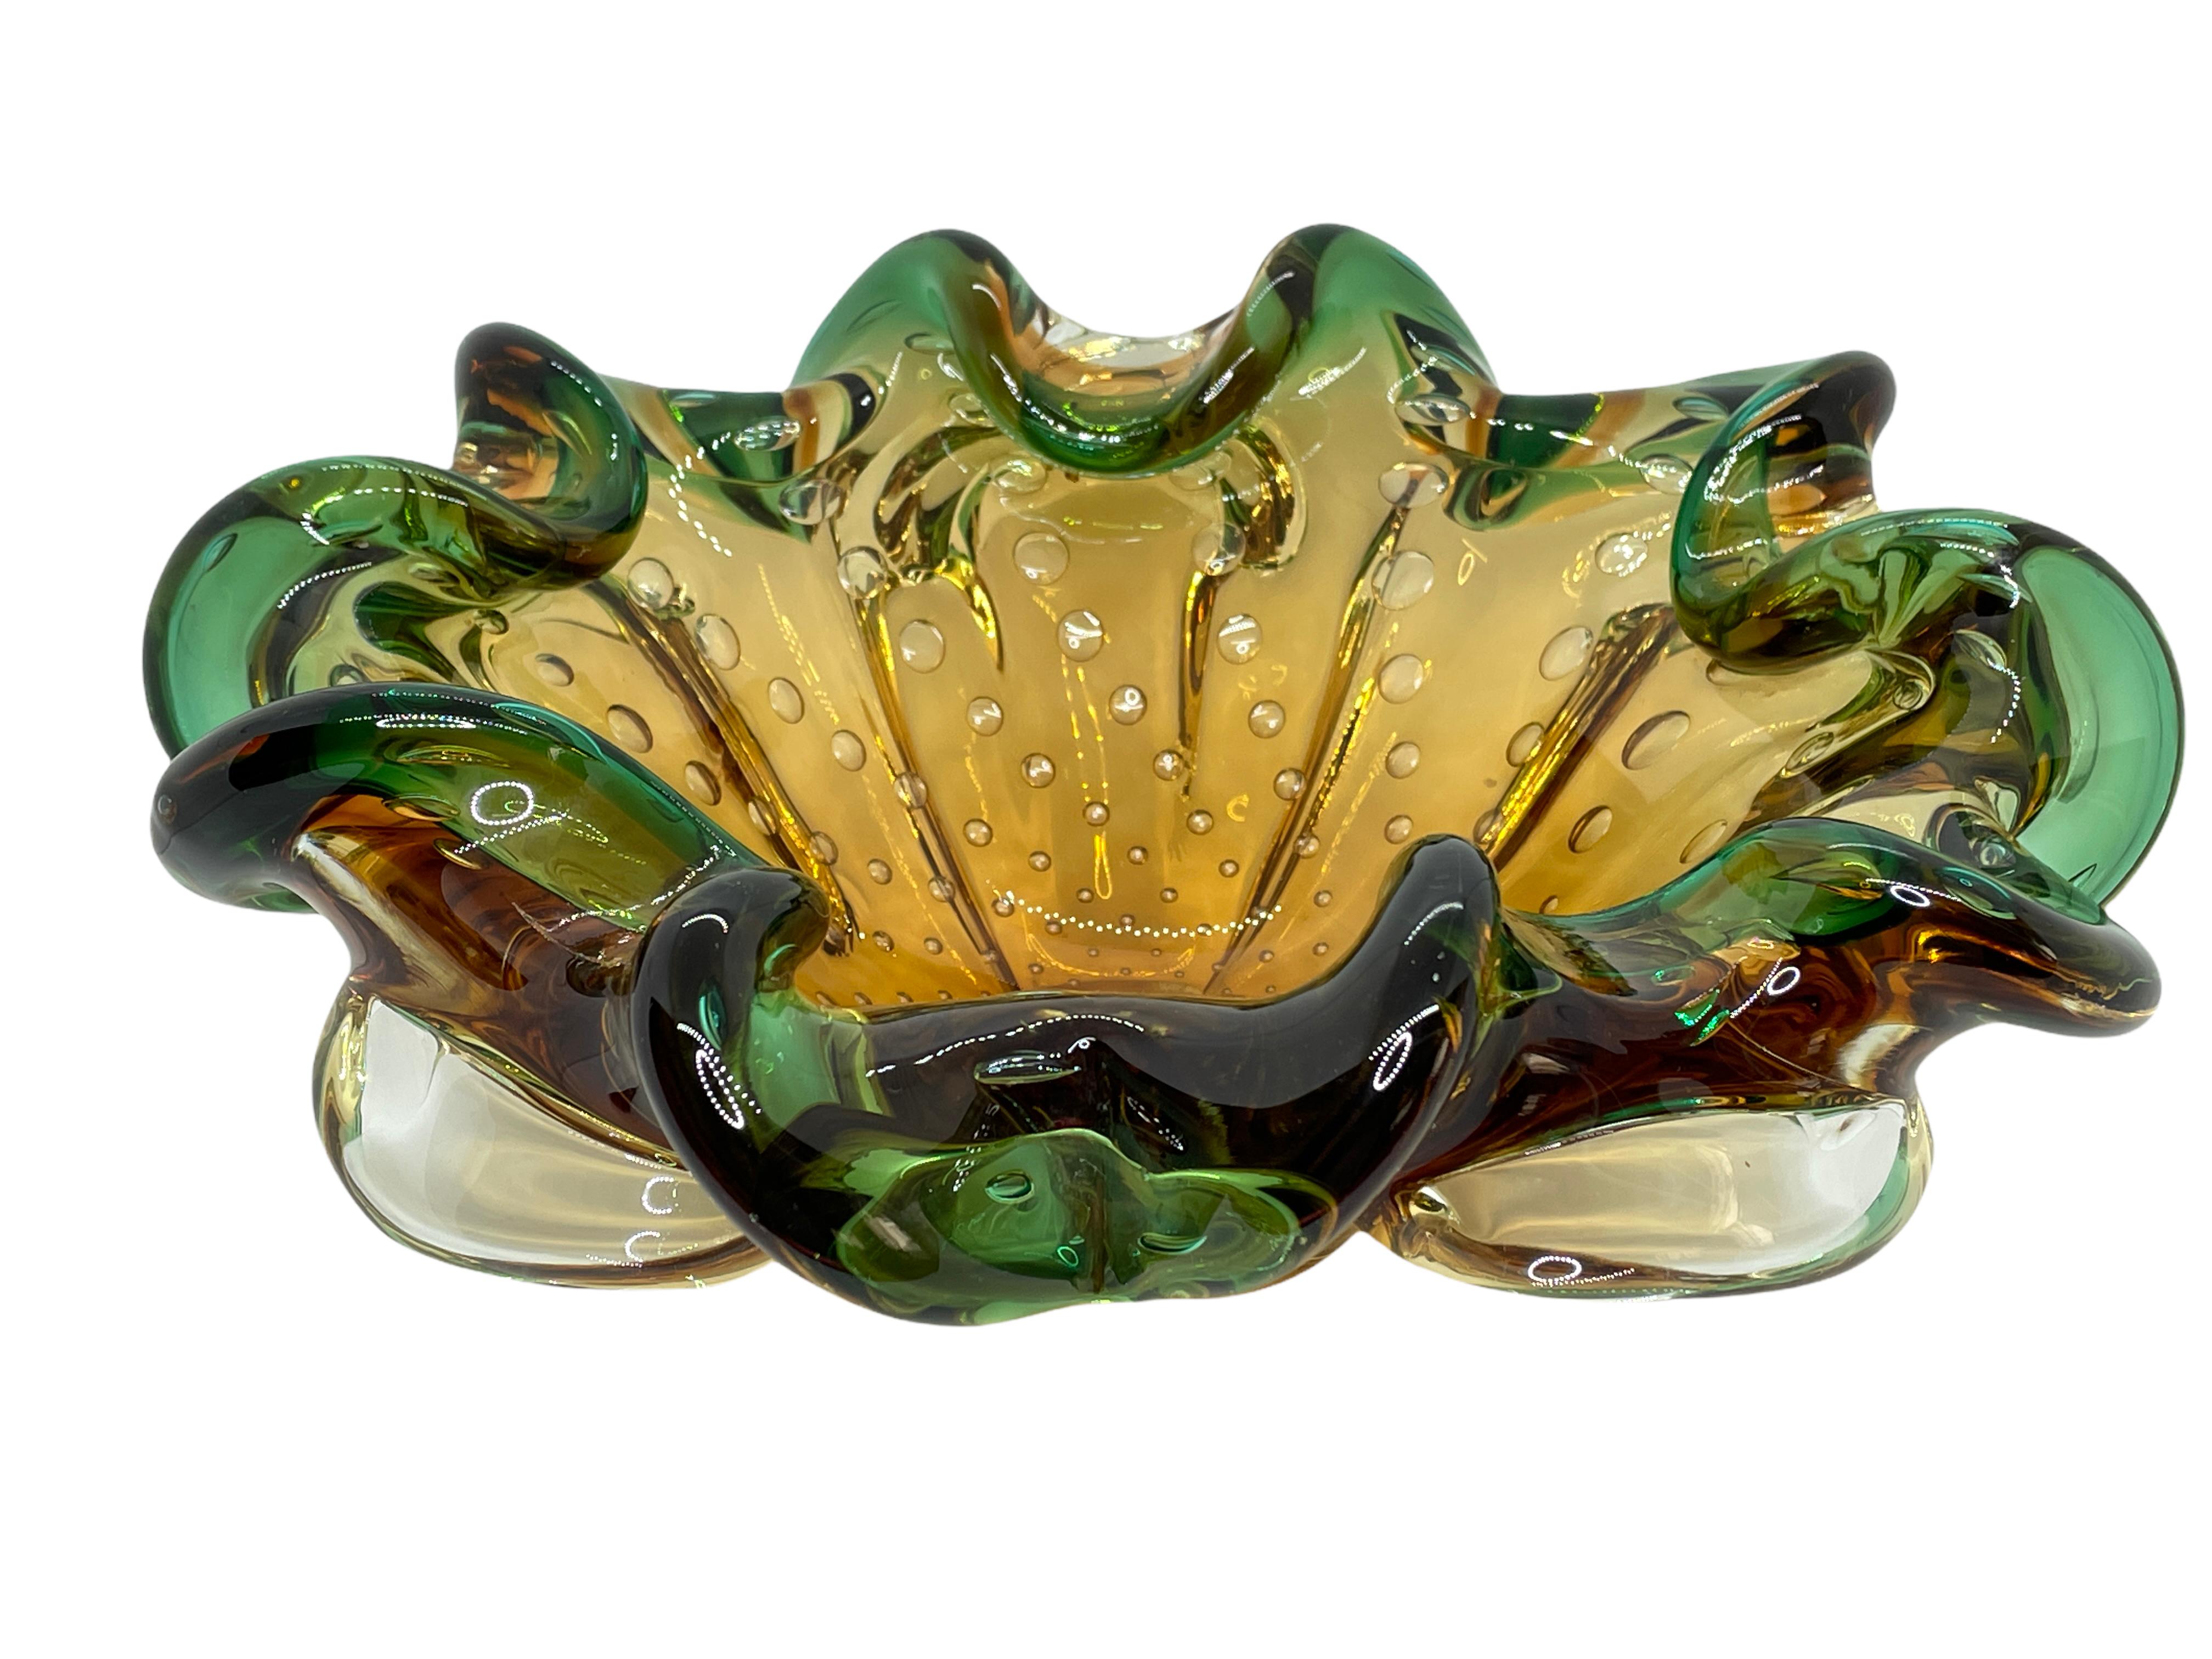 An amazing Venetian Murano glass object in an unusual design and a pretty beautiful green and amber color. A highly decorative piece useful as center piece, bowl, fruit bowl or catchall. Italy, 1970s.